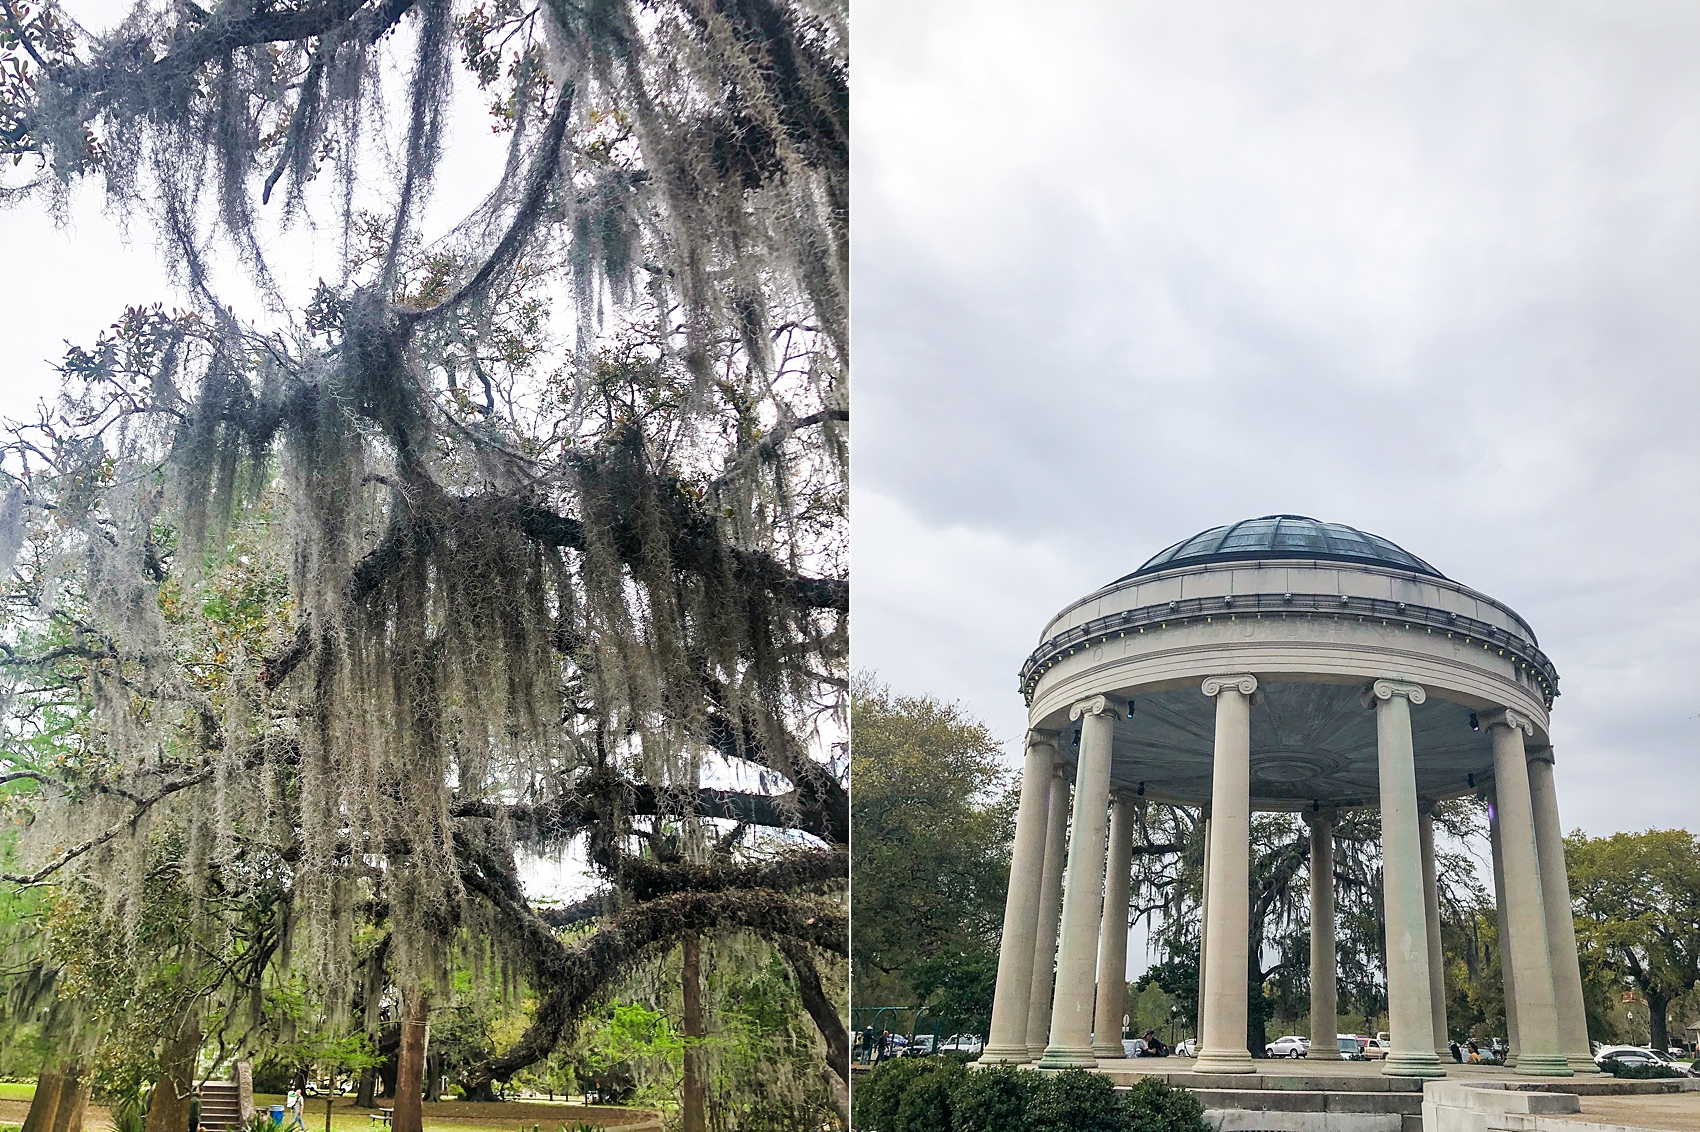 Leah Hope Photography | New Orleans, Louisiana | Traveling Photographer | NOLA | The Big Easy | Oak Alley Plantation | The French Quarter | The Garden District | City Park 